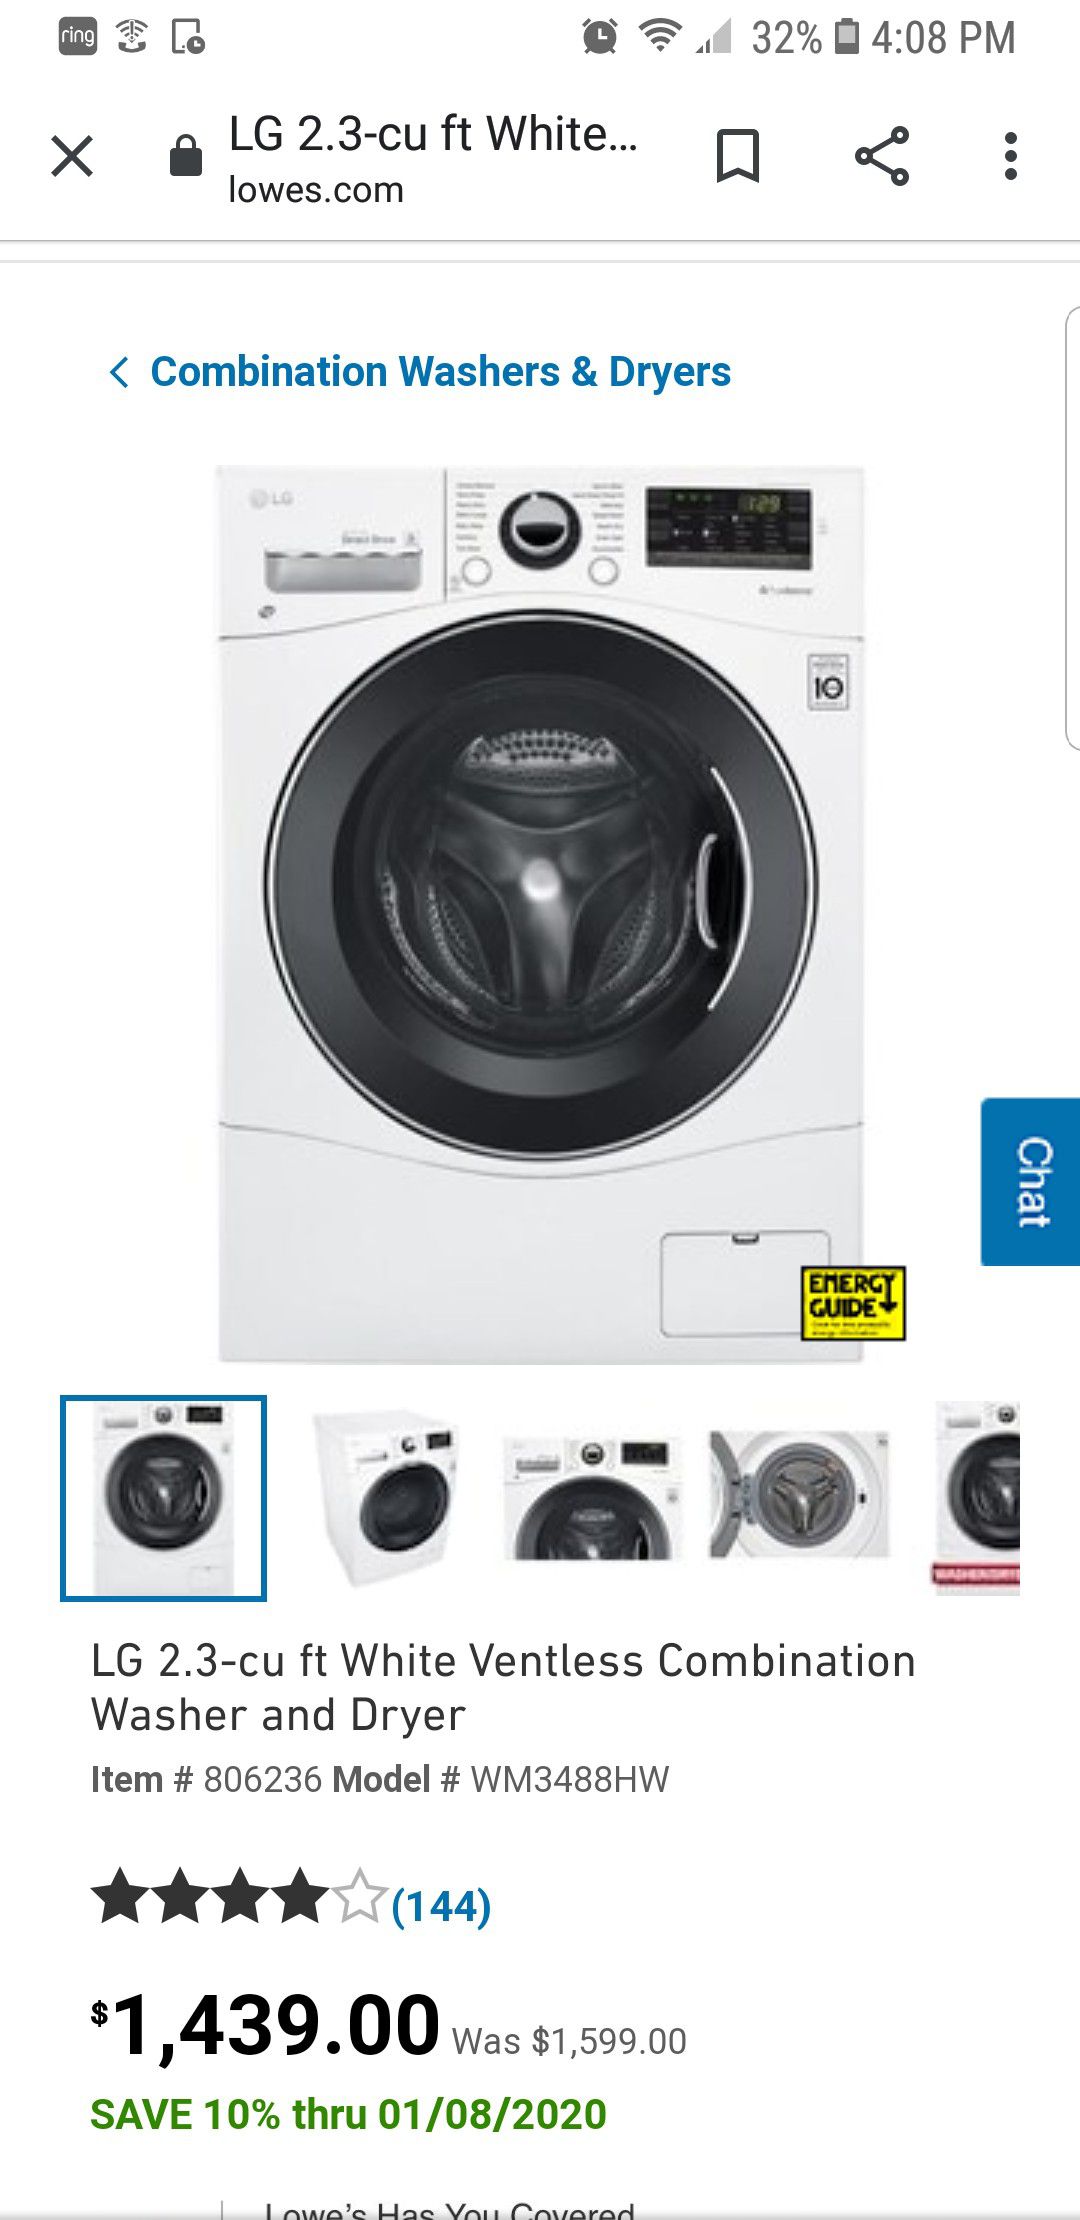 New LG ventless combination washer dryer